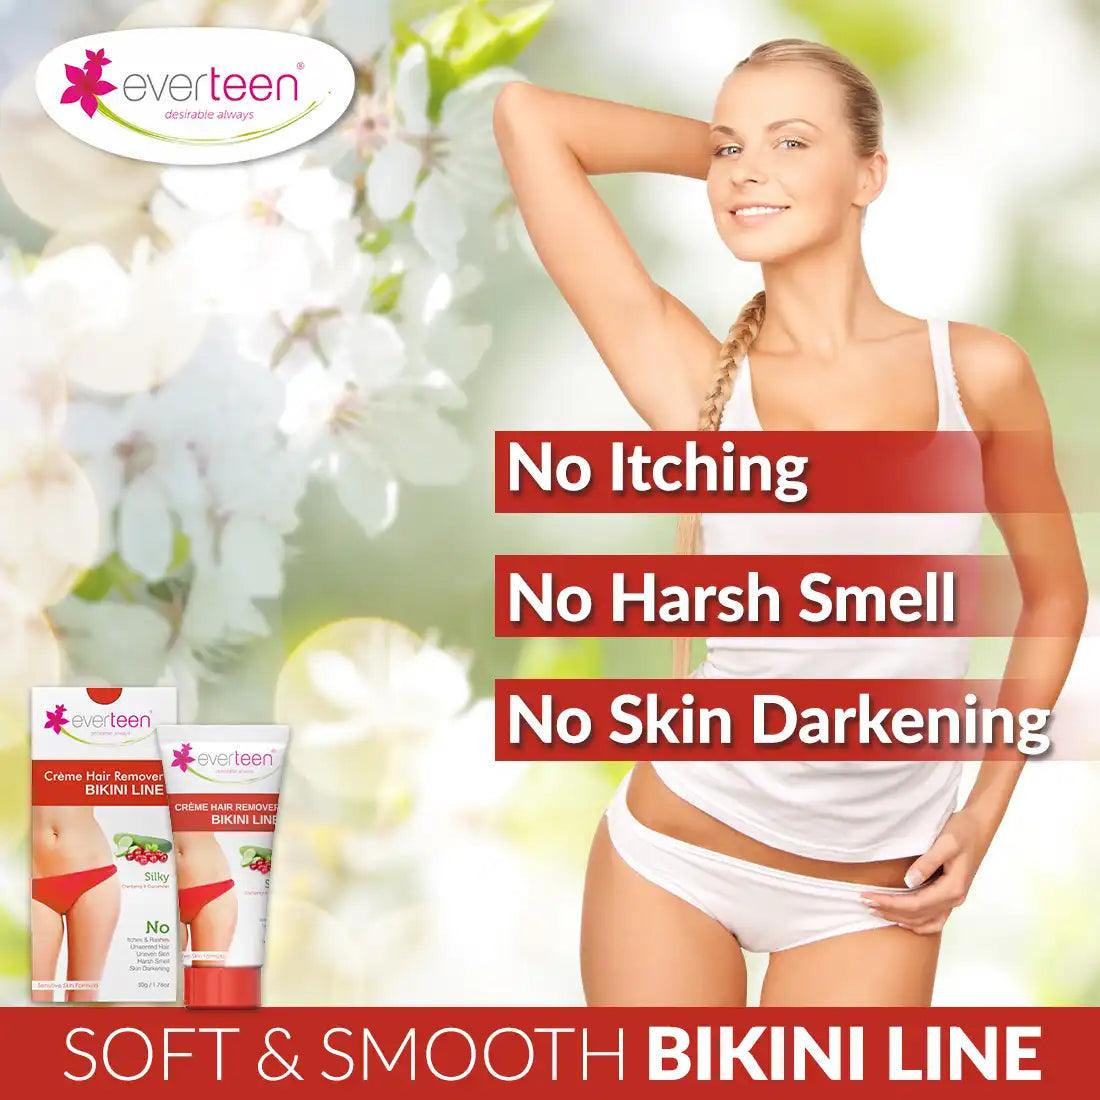 everteen Silky Hair Remover Creme 50g for Bikini Line and Underarms Does Not Cause Itching or Skin Darkening- everteen-neud.com